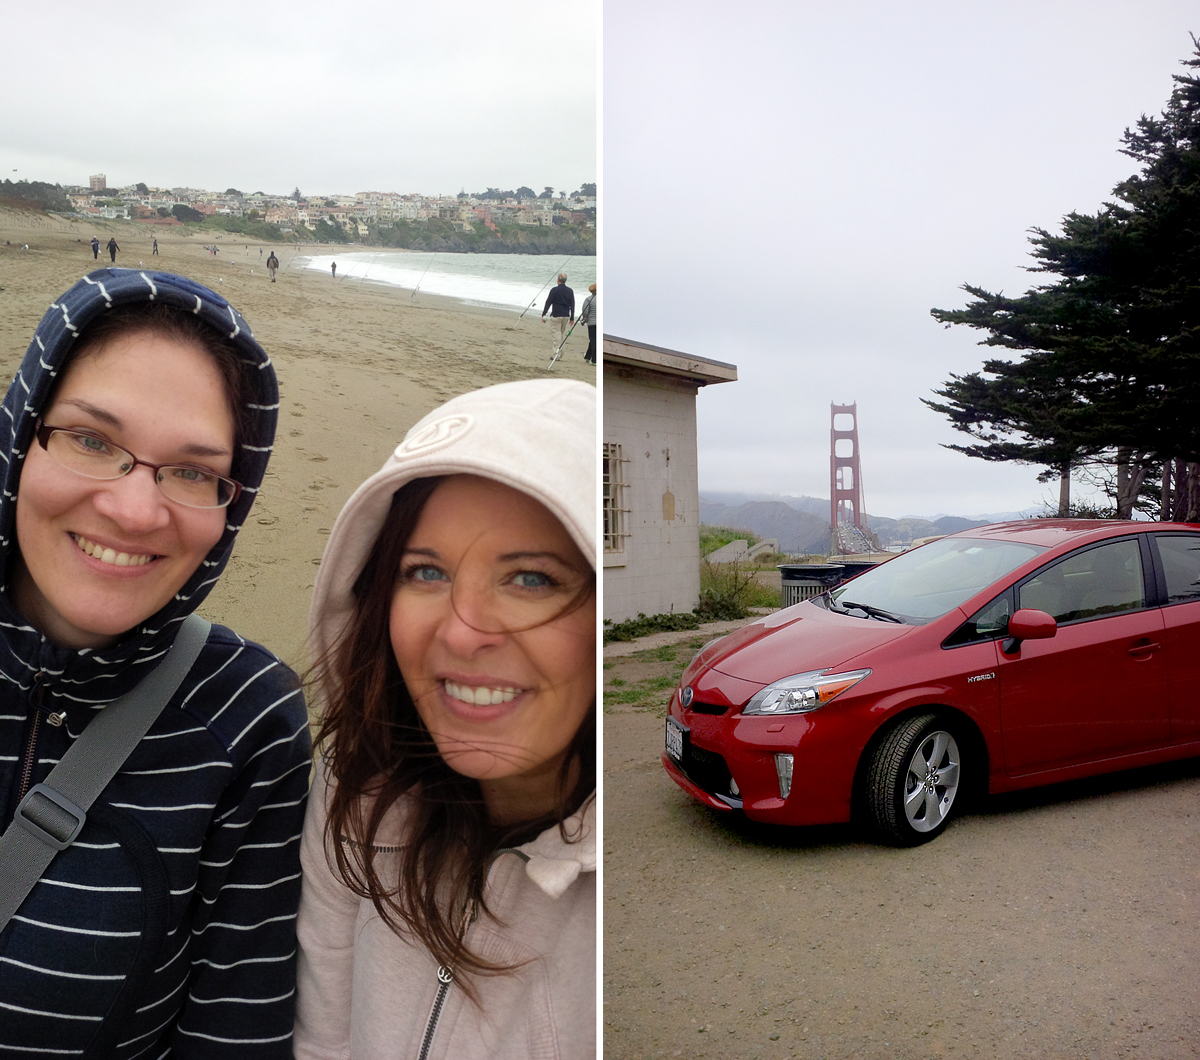 Baker-Beach-and-Prius